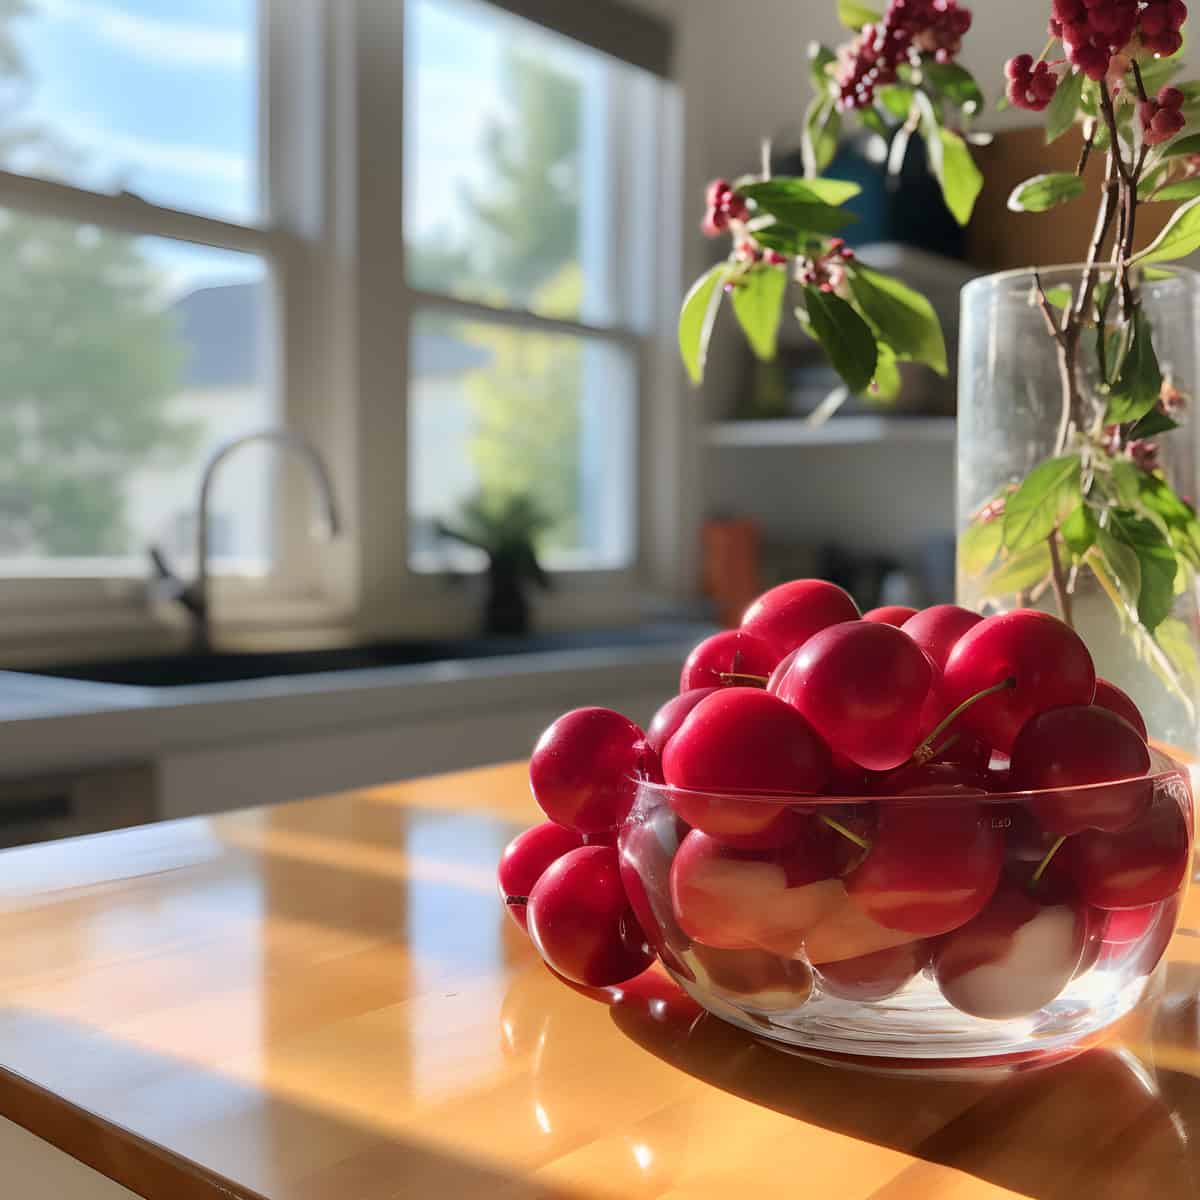 Pacific Crabapple on a kitchen counter